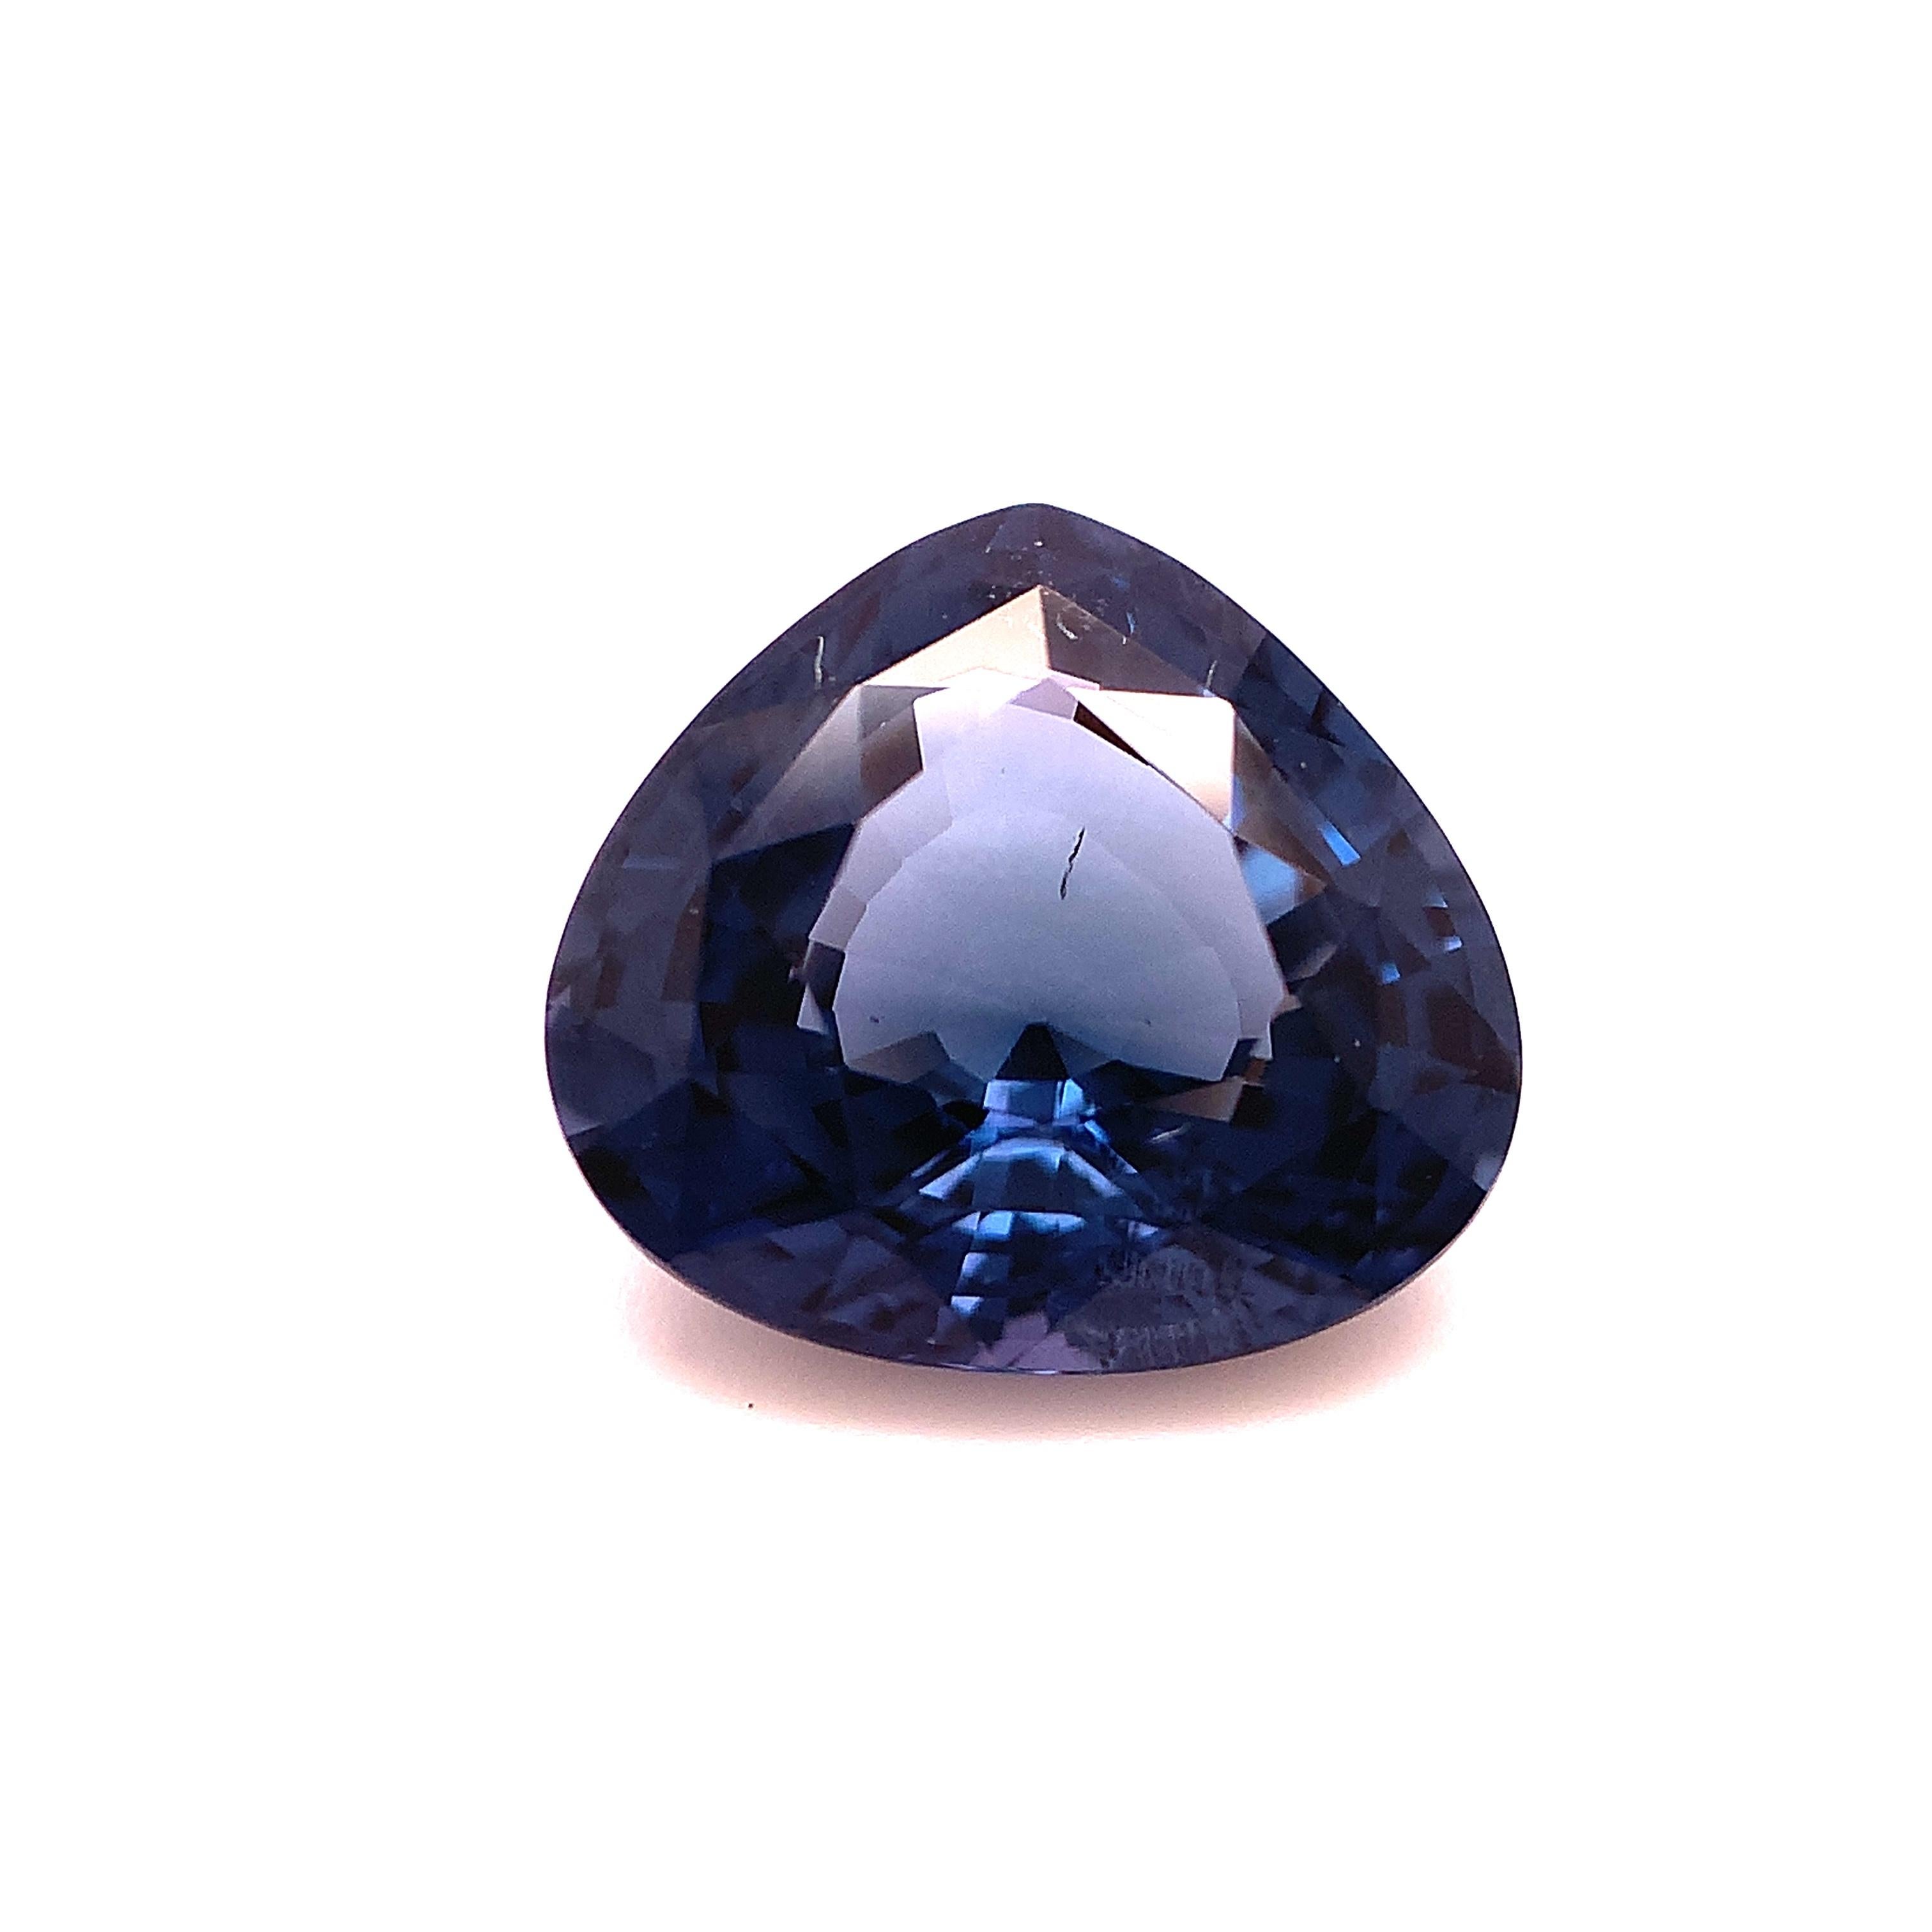 Unheated 5.02 Carat Blue Spinel, Loose Gemstone, GIA Certified ..... A For Sale 1